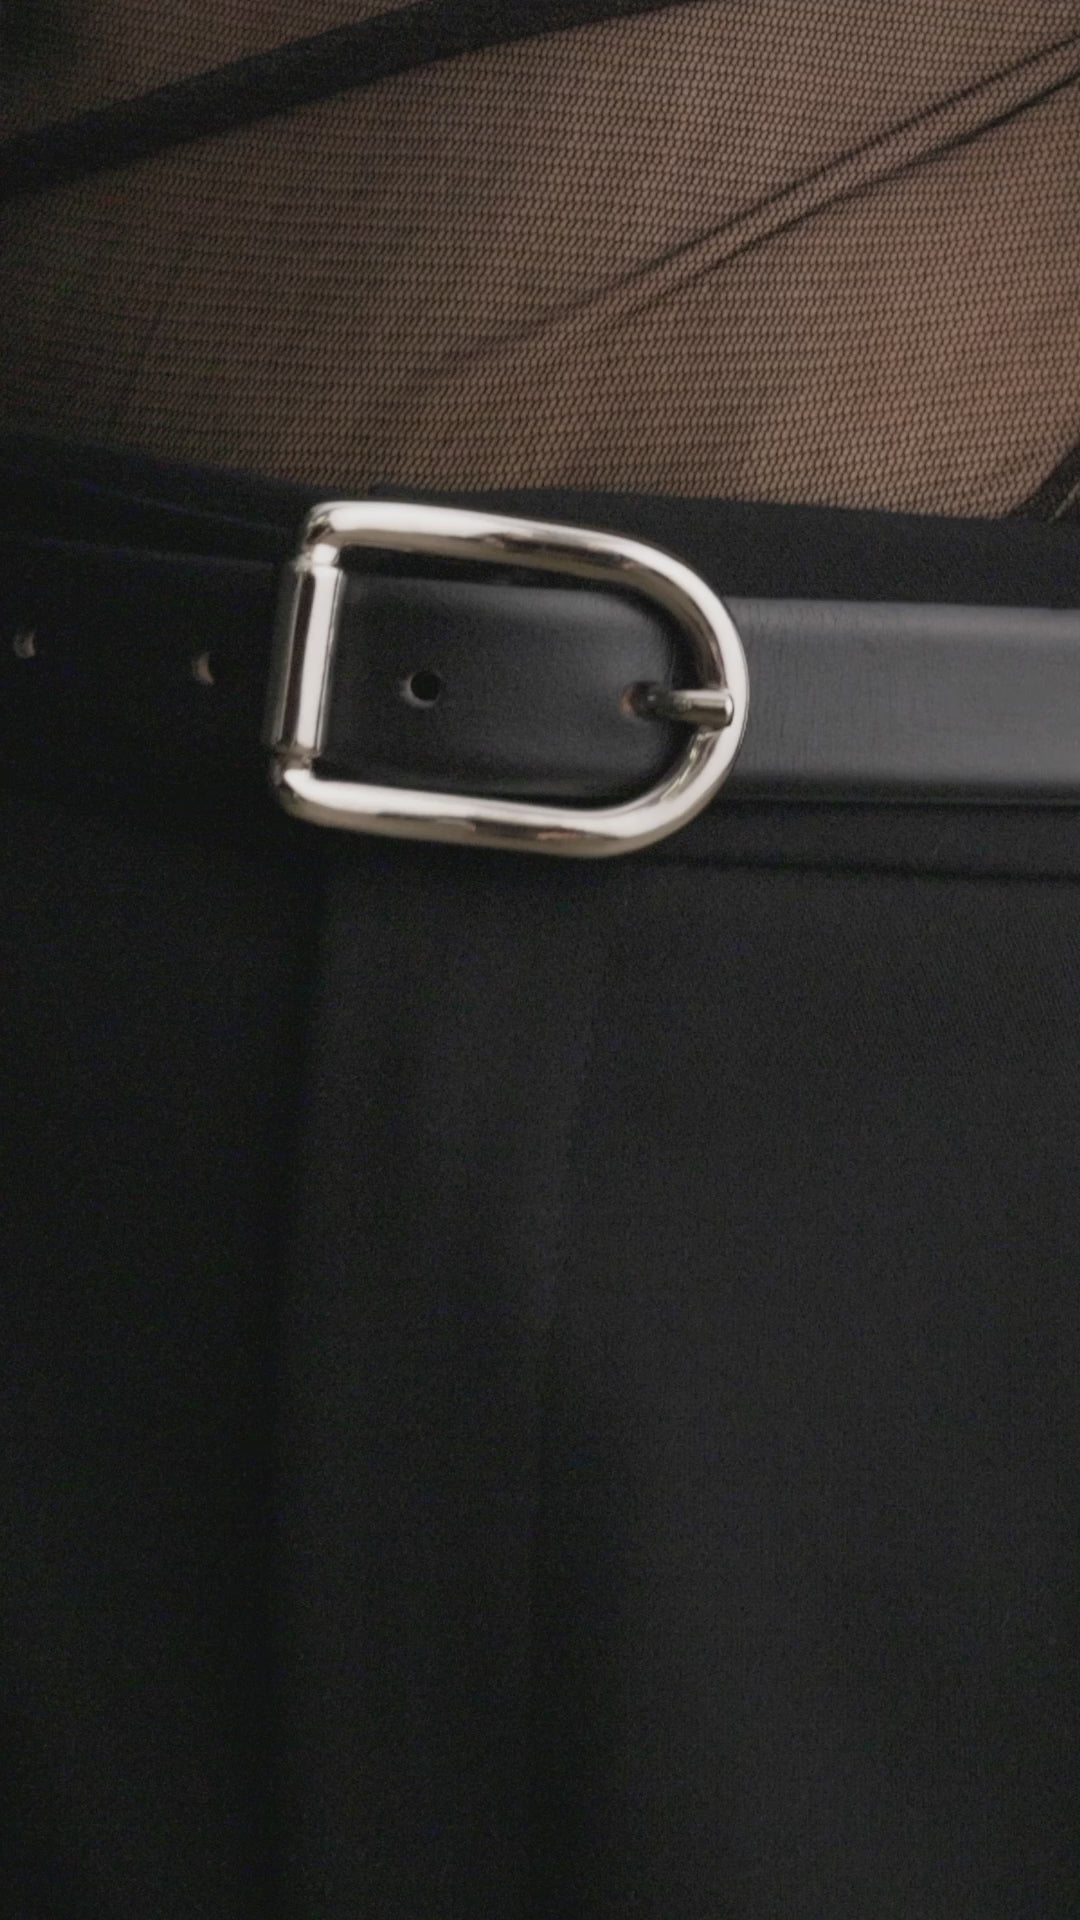 Model wearing Déhanche Mija black leather belt with silver buckle, styled with black trousers, a sheer black top, and an oversized black blazer.